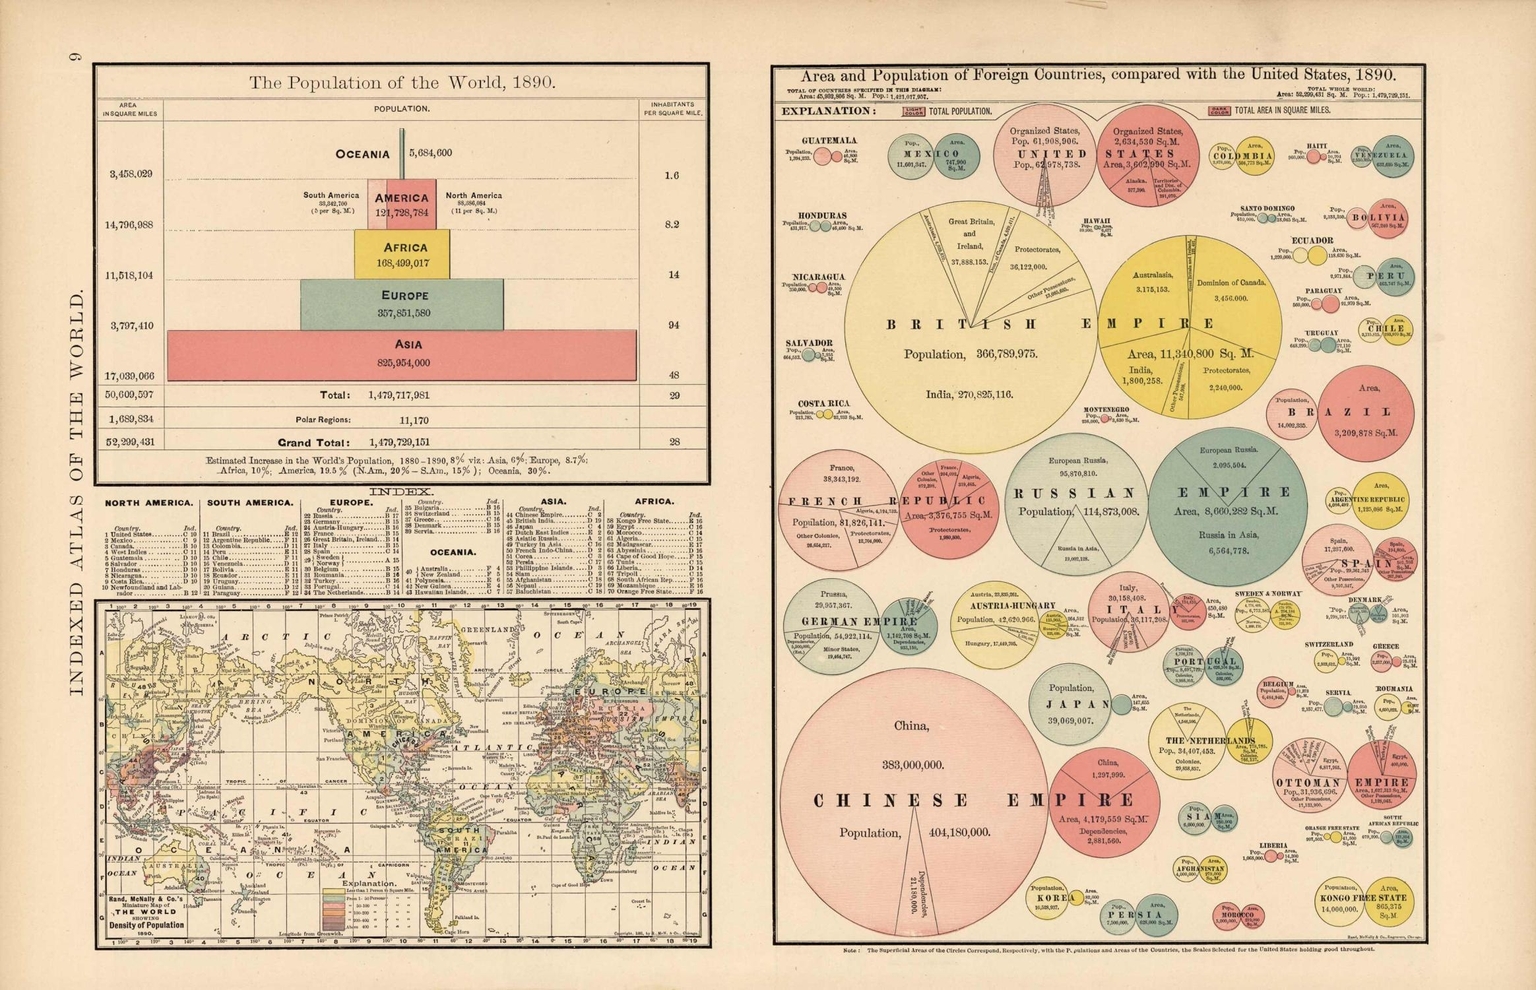 A historical data visualization piece includes a map and a complex bar chart on the left, accompanied by multiple pie charts on the right. The visualization employs muted red, green, and yellow colors. However, the pie charts on the right side are challenging to read due to their density.